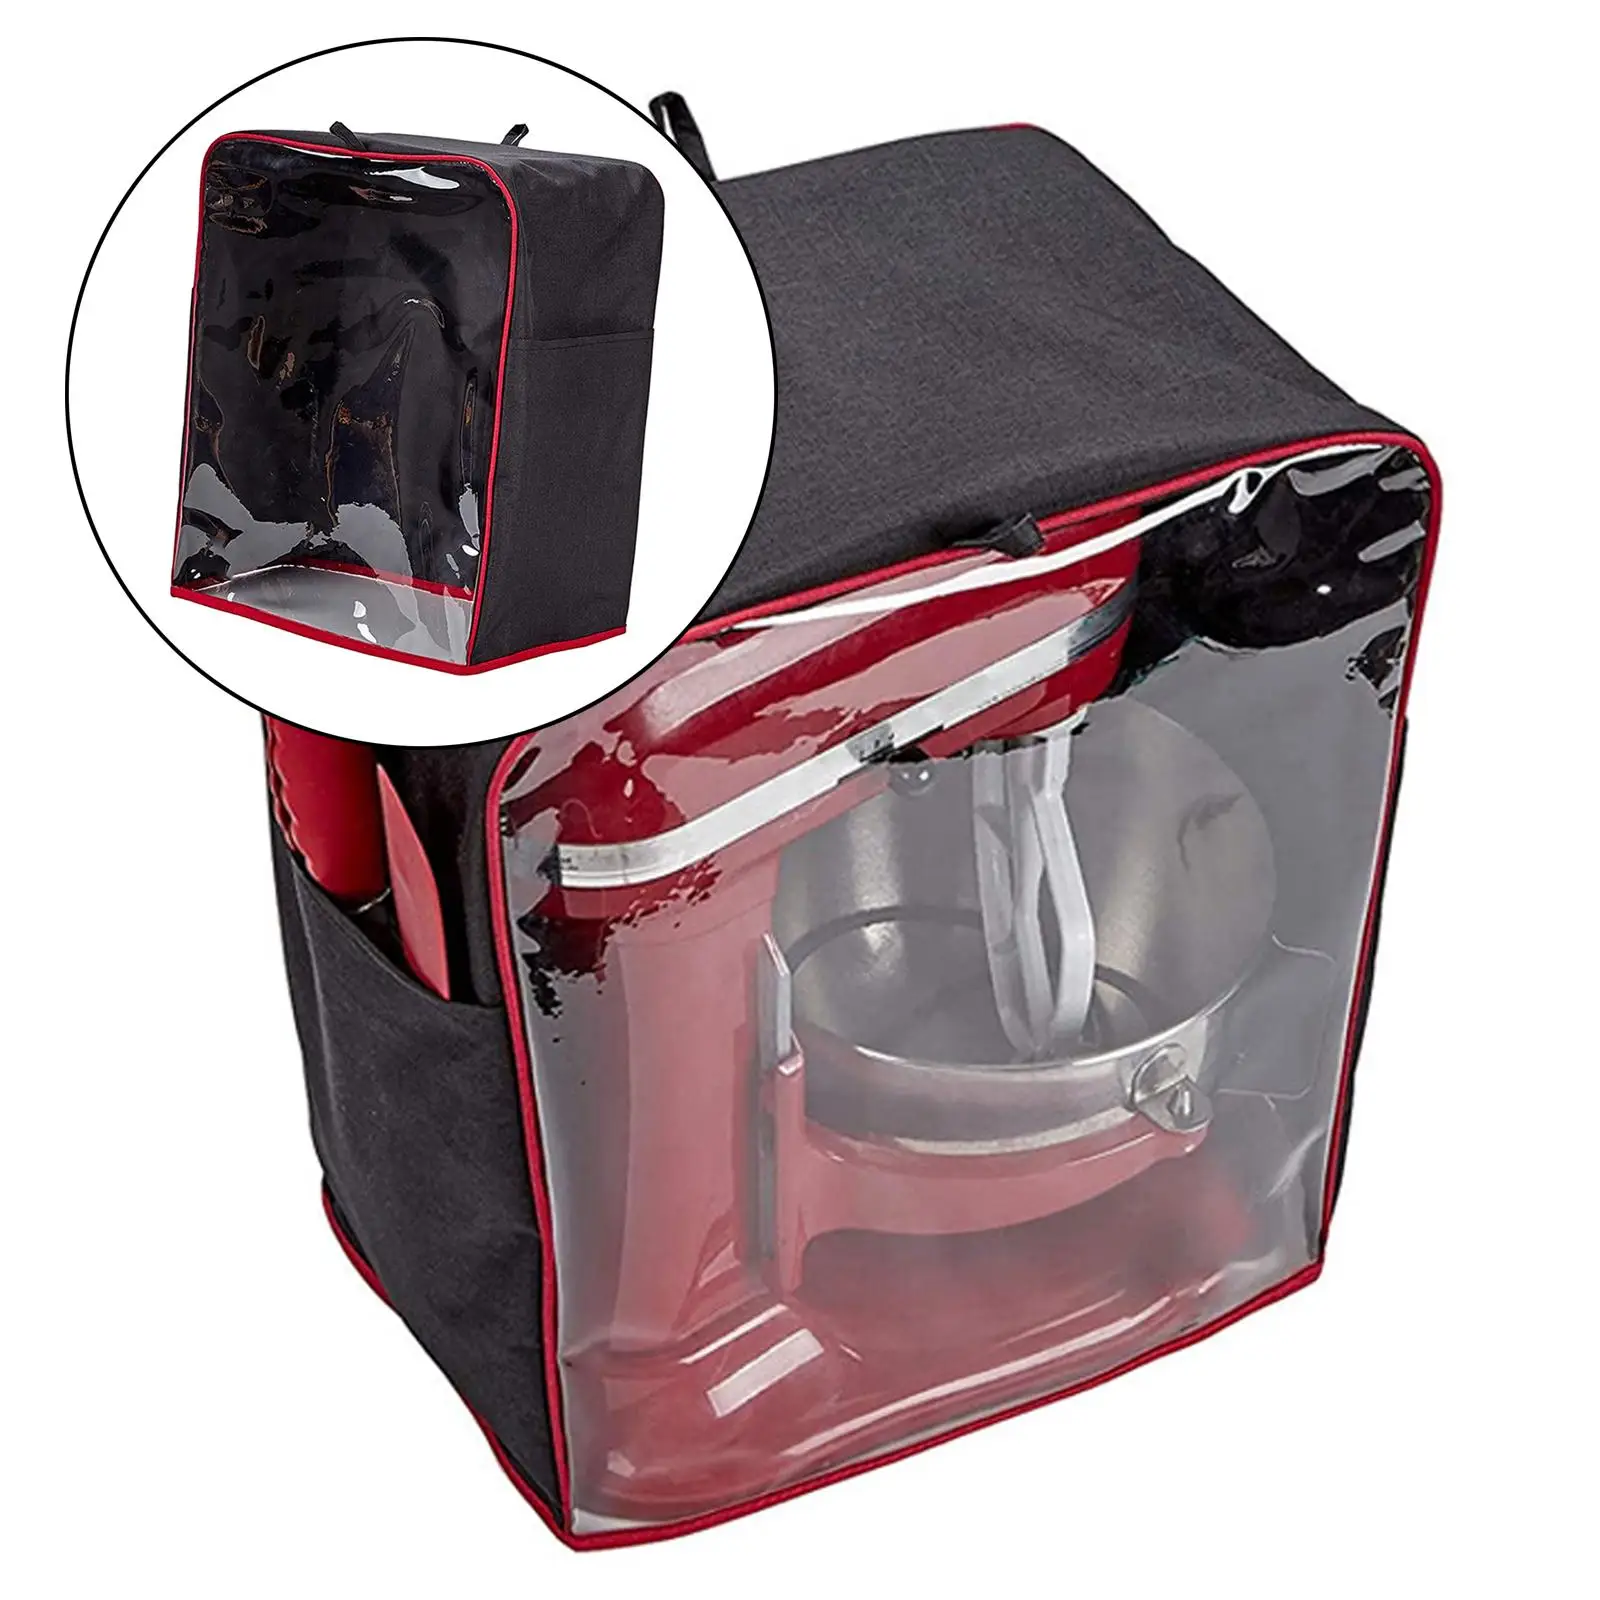 Stand Mixer Dust  Cover with Top Handle and Pockets Washable Dust  Blender Protective Cover  Brand Models Mixer Accessory